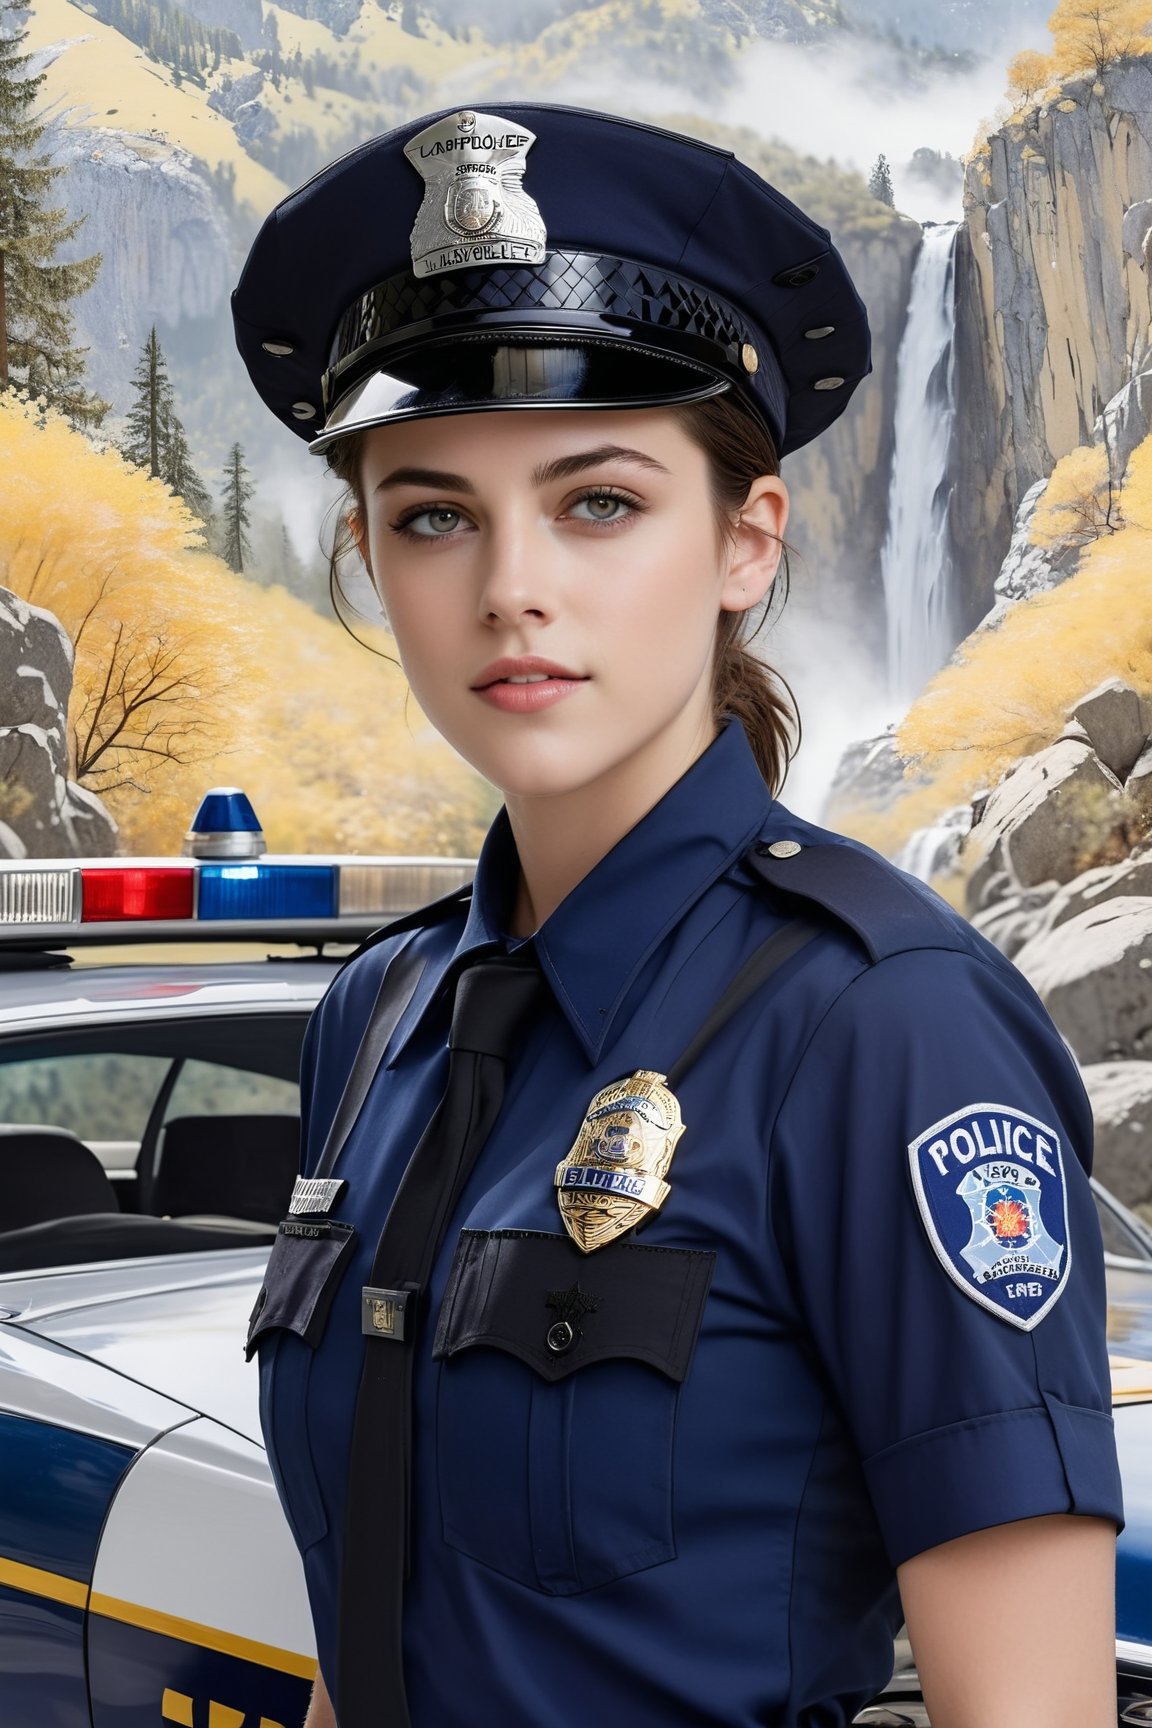 Hyper-Realistic photo of a beautiful LAPD police officer,20yo,1girl,solo,LAPD police uniform,cap,detailed exquisite face,soft shiny skin,smile,sunglasses,looking at viewer,Kristen Stewart lookalike,cap,fullbody:1.3
BREAK
backdrop:art1stp0int,waterfall,tree,rock,forest, mountain,landscape,scenery,nature,water,day,police car,(girl focus),[cluttered maximalism]
BREAK
settings: (rule of thirds1.3),perfect composition,studio photo,trending on artstation,depth of perspective,(Masterpiece,Best quality,32k,UHD:1.4),(sharp focus,high contrast,HDR,hyper-detailed,intricate details,ultra-realistic,kodachrome 800:1.3),(cinematic lighting:1.3),(by Karol Bak$,Alessandro Pautasso$,Gustav Klimt$ and Hayao Miyazaki$:1.3),art_booster,photo_b00ster, real_booster,Ye11owst0ne